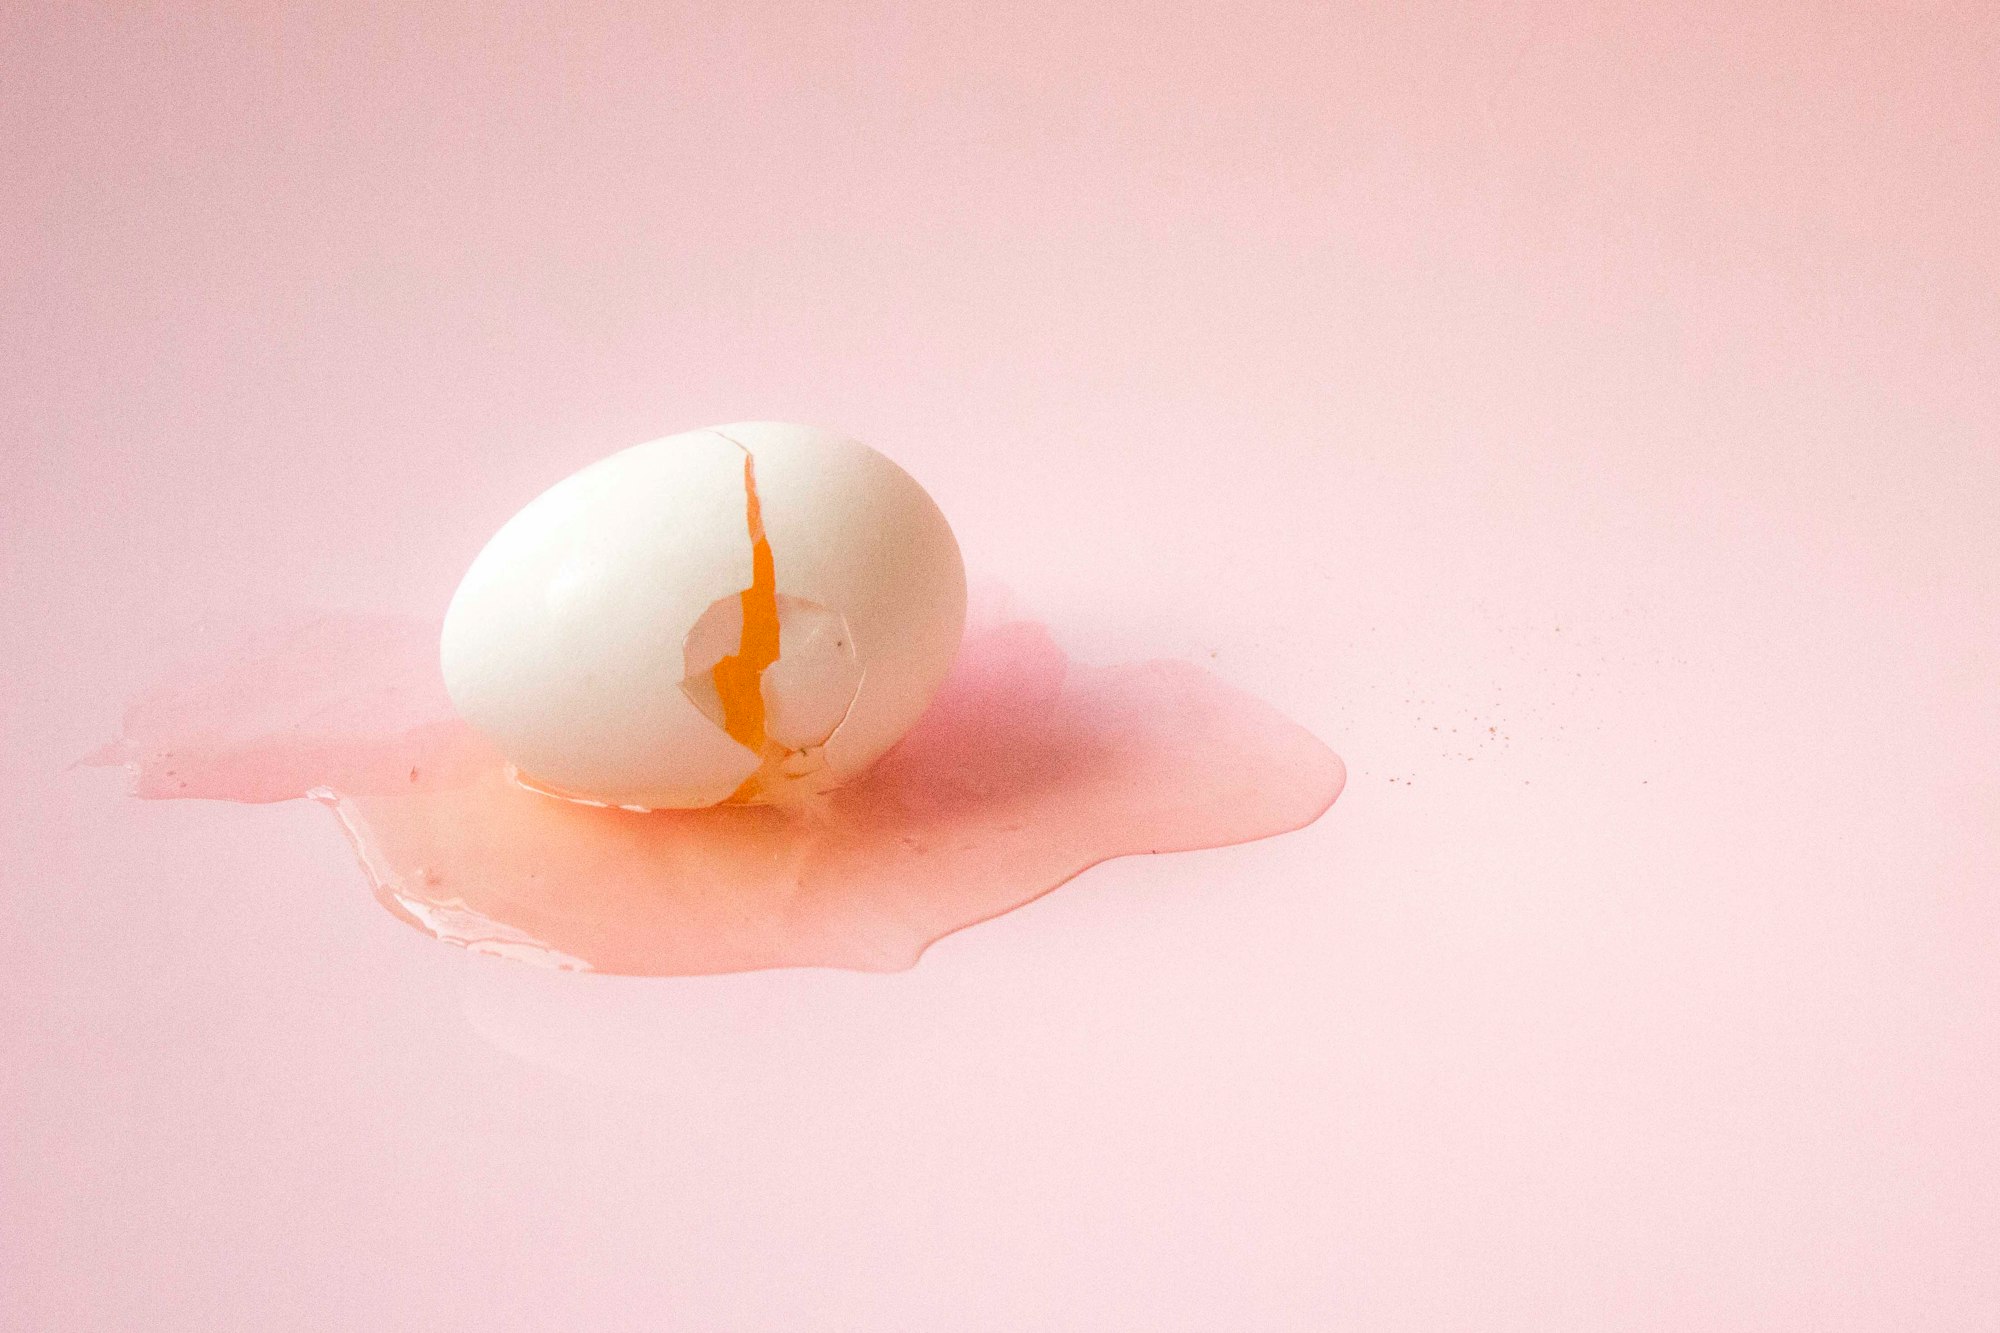 Too much or too little DHEA-S can affect fertility by Melani Sosa for Unsplash.